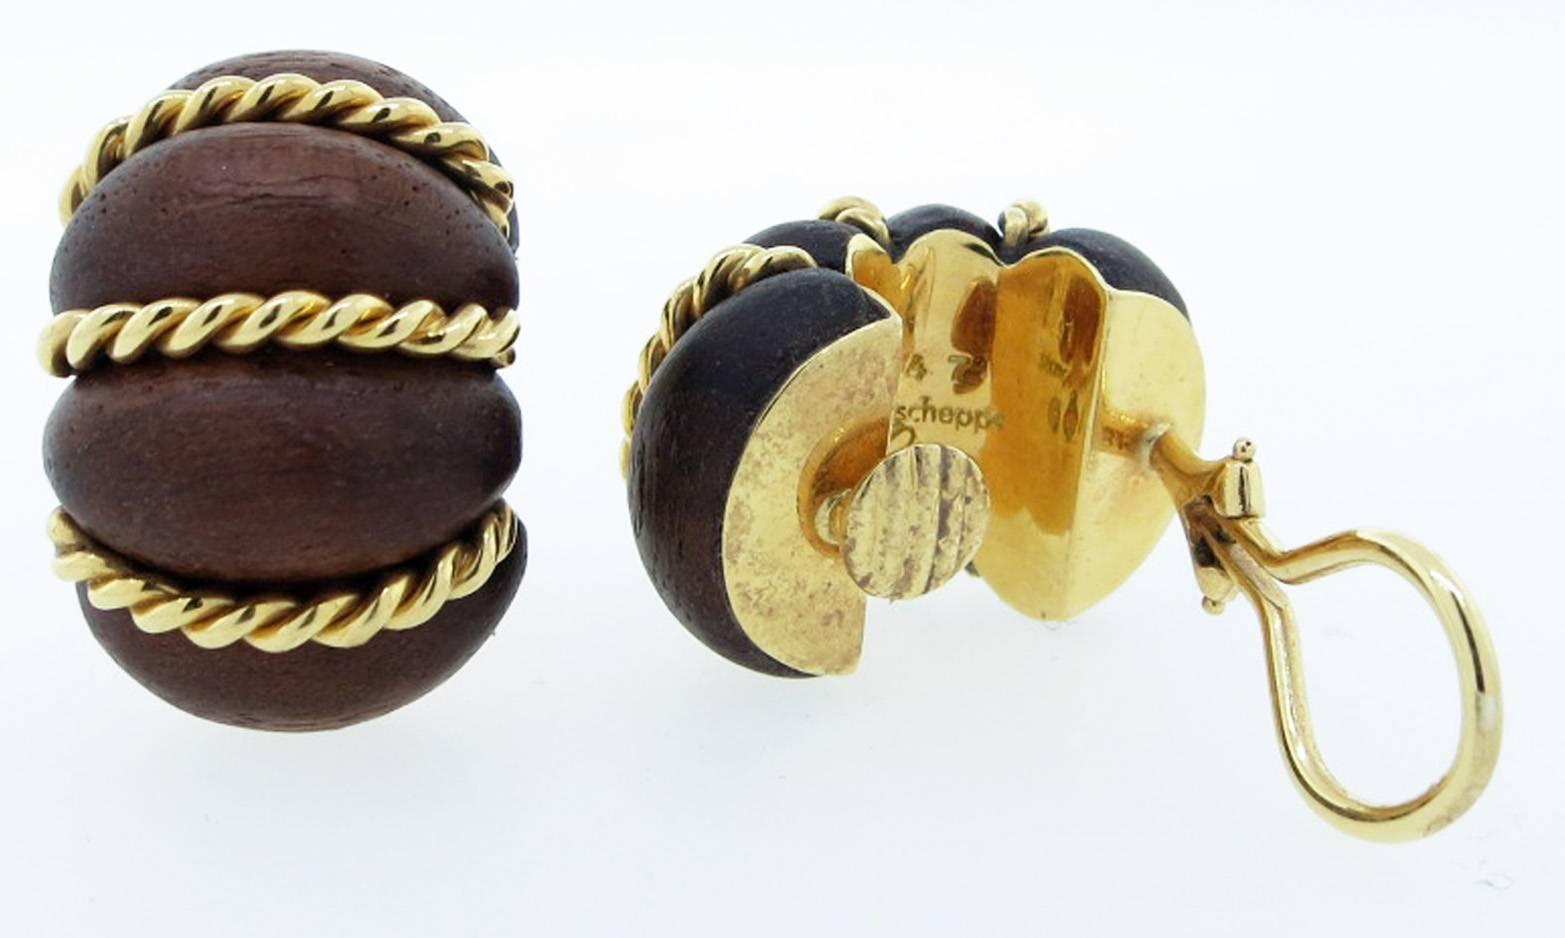 Iconic Seaman Schepps carved fruitwood and 18kt. yellow gold earrings. Each earring measures approx. 1 inch in length and be worn with ease from daytime to evening wear. Clip back posts can be added.